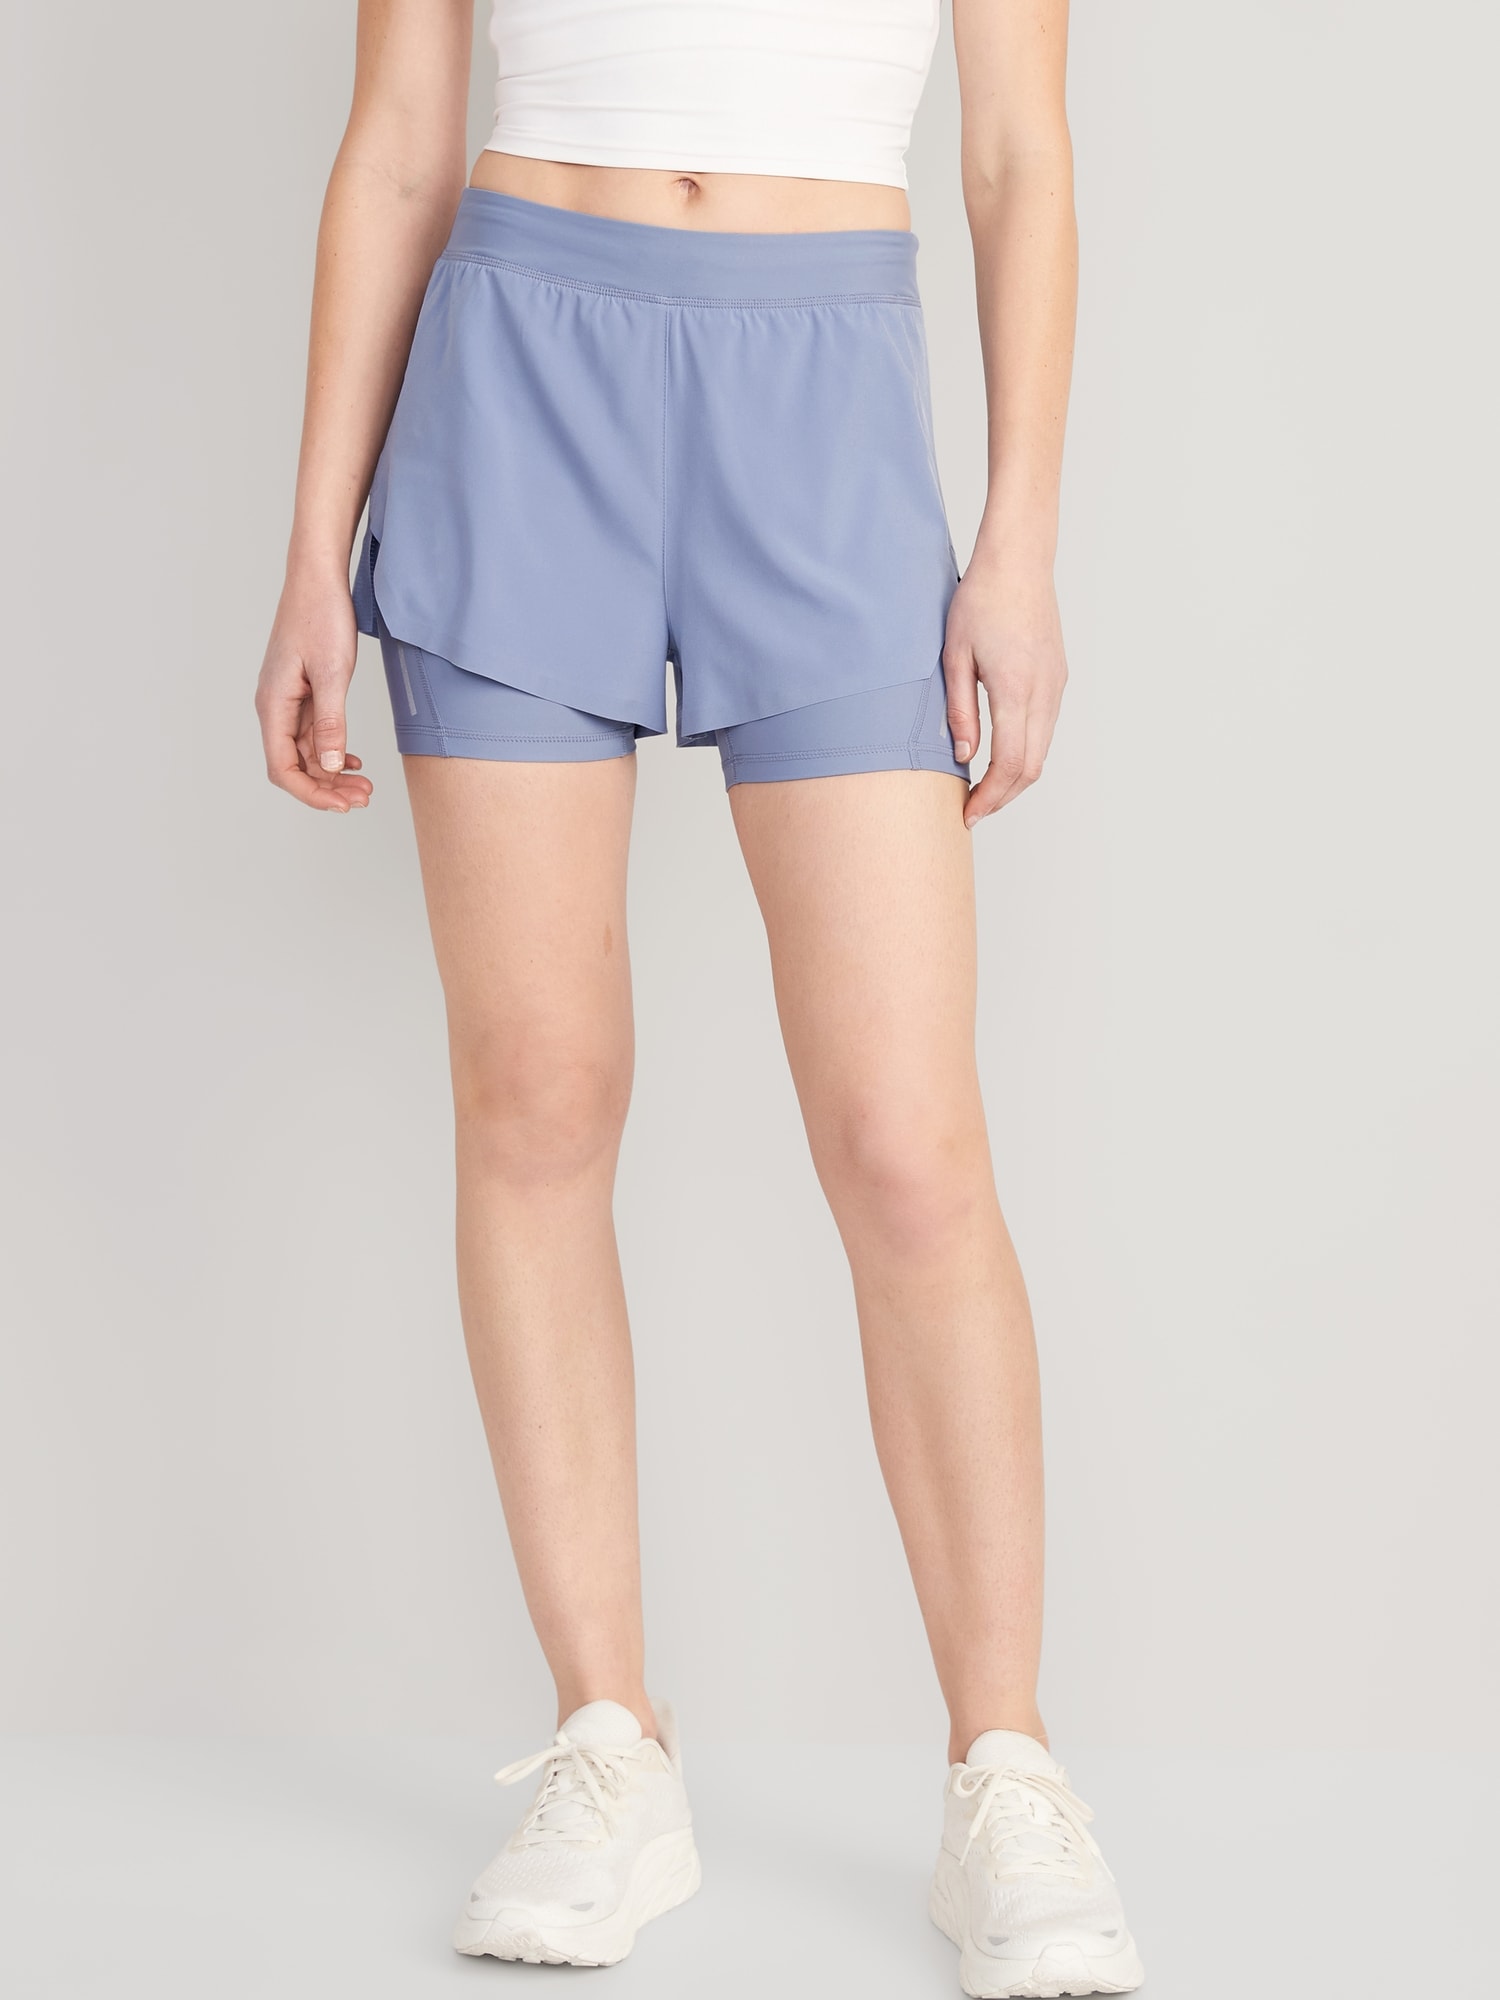 Old Navy - High-Waisted StretchTech Shorts for Women -- 4-inch